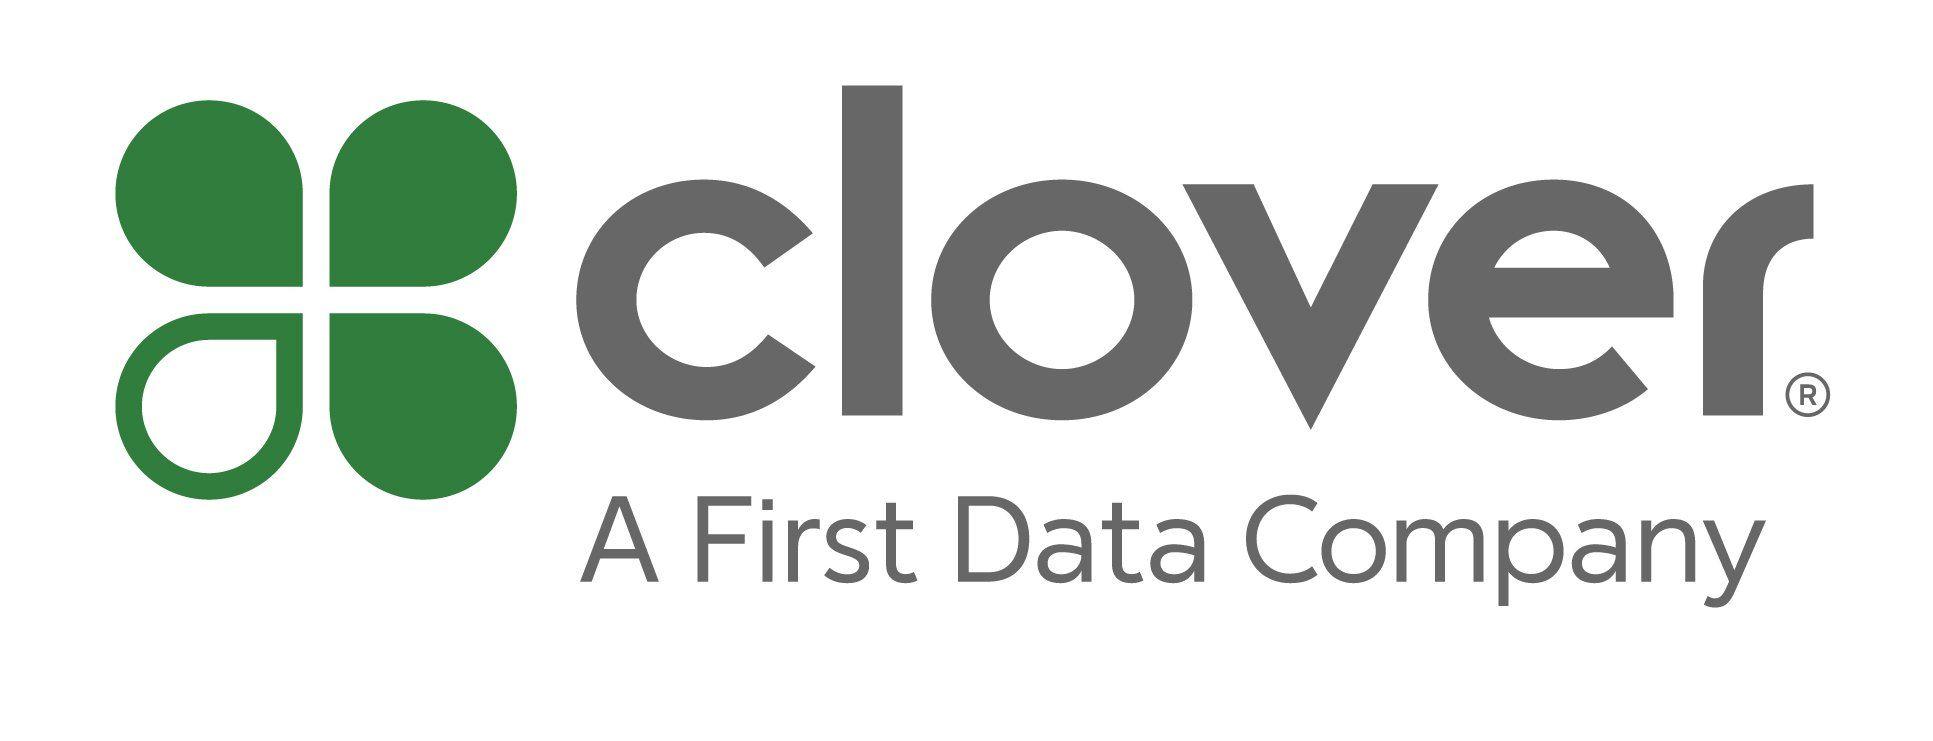 New First Data Logo - Clover Station Point of Sale Review | HeroPay